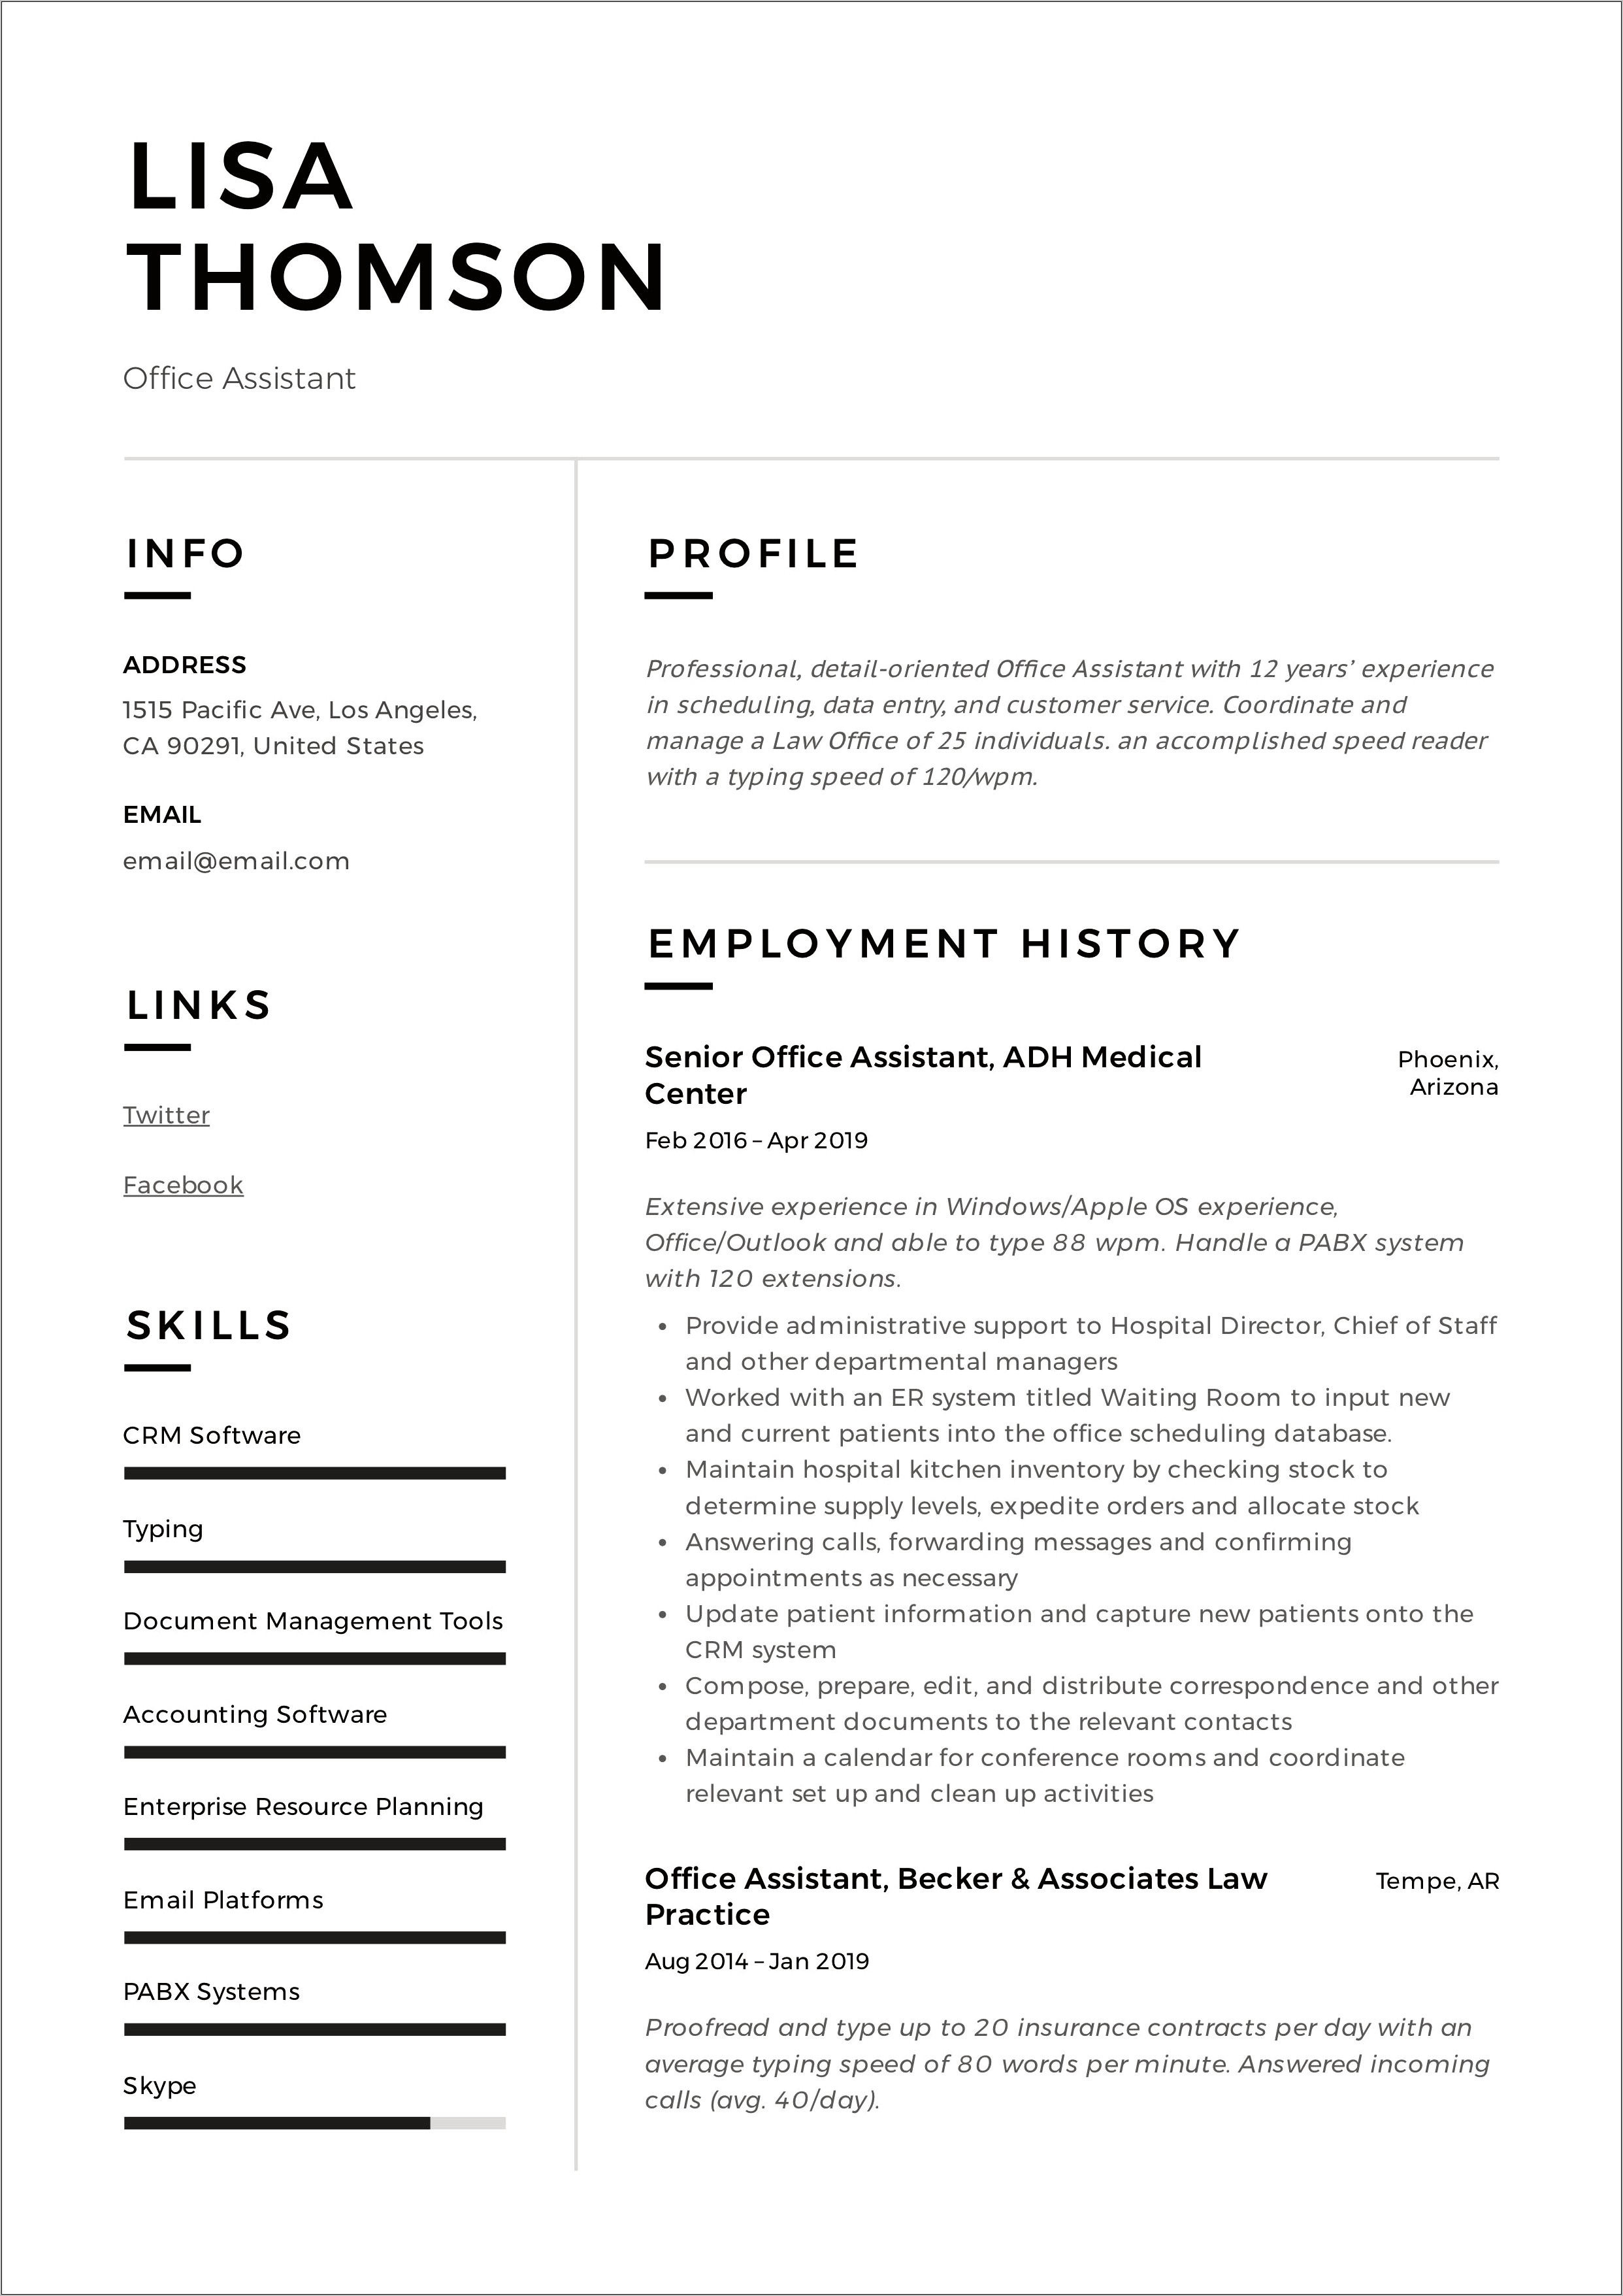 Sample Resume Summary For Office Assistant